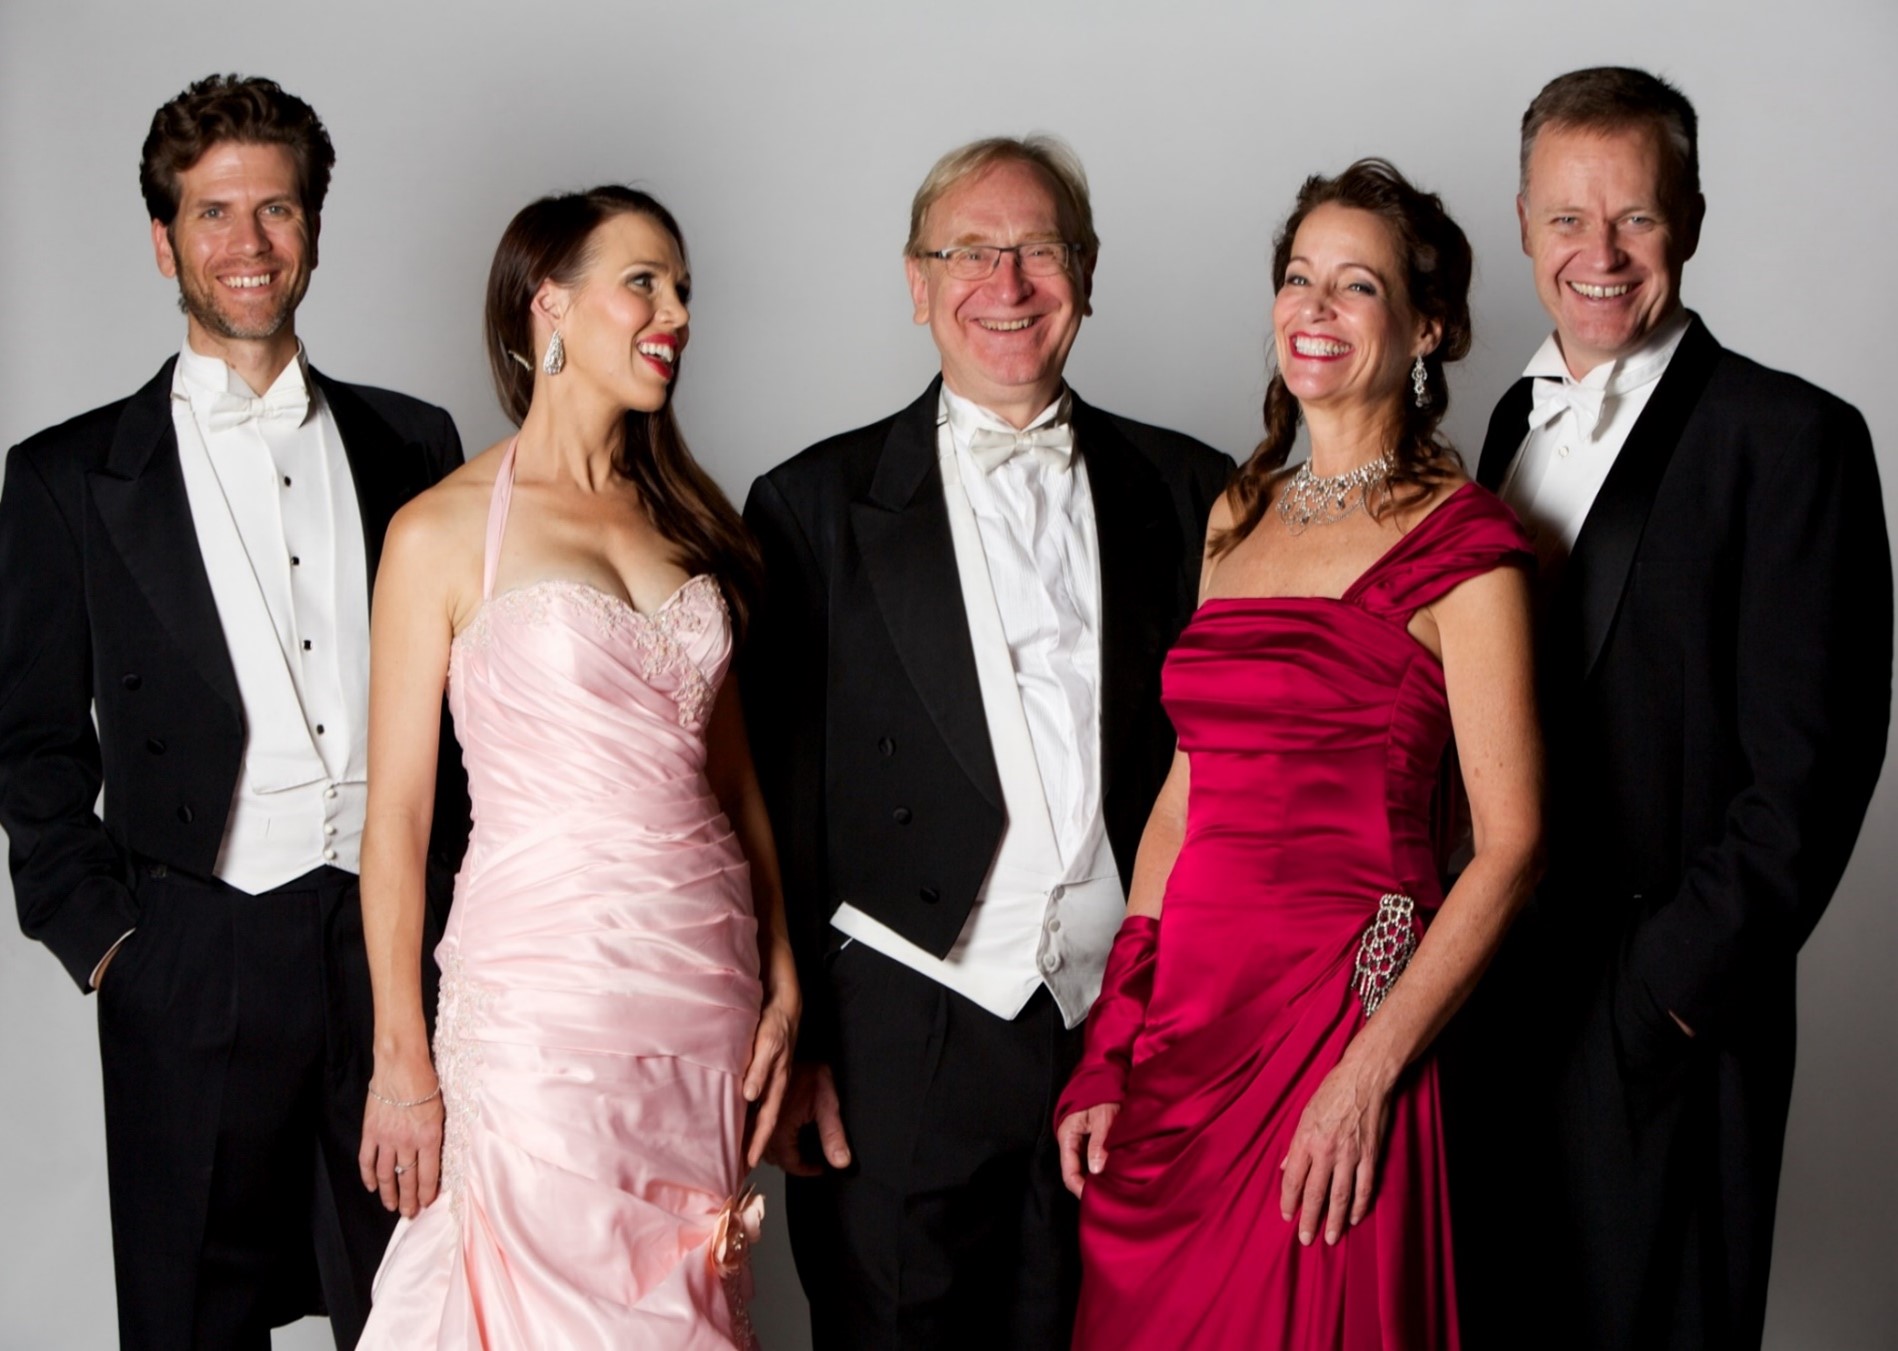 Five people dressed in formal attire smiling and laughing